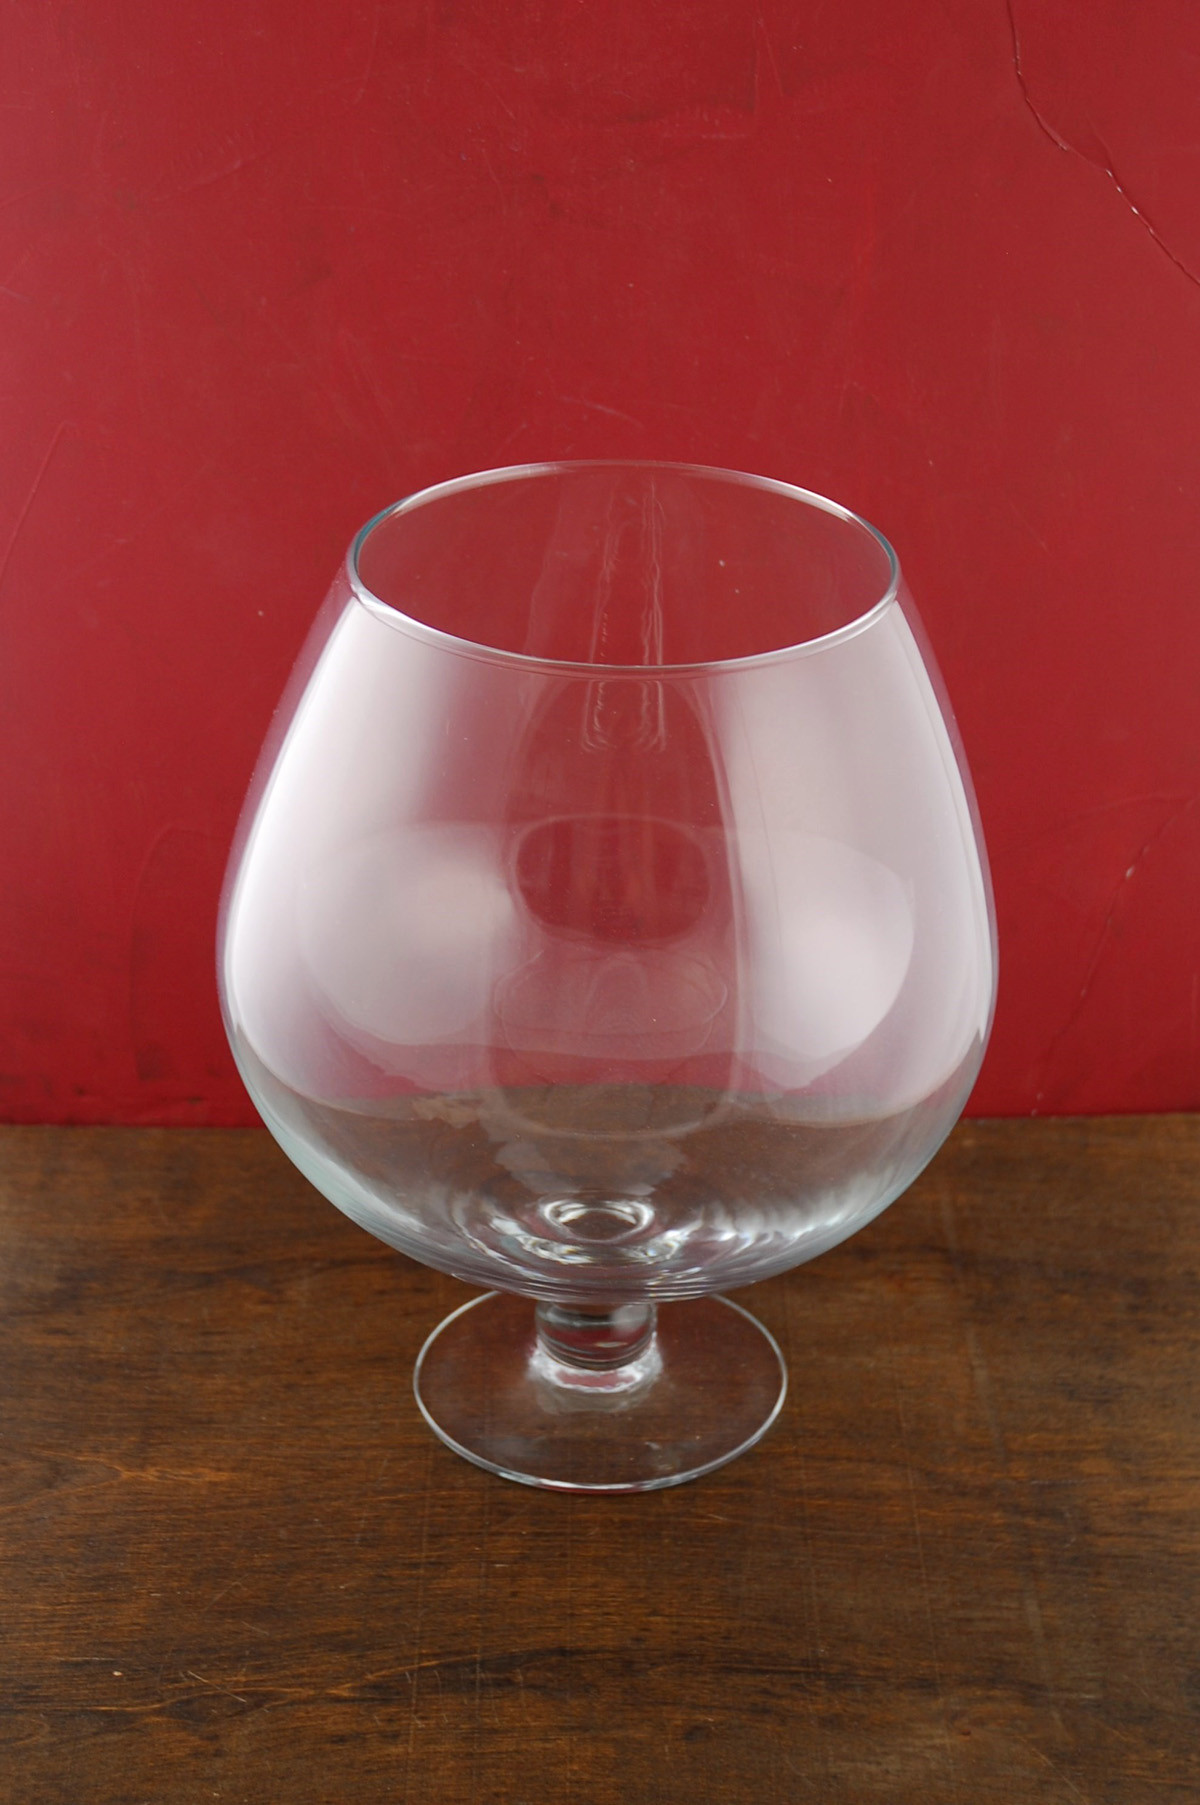 24 Recommended Extra Large Brandy Glass Vase 2024 free download extra large brandy glass vase of brandy snifter vase vase and cellar image avorcor com with large brandy gl vase 11 5 inch 250 ounce